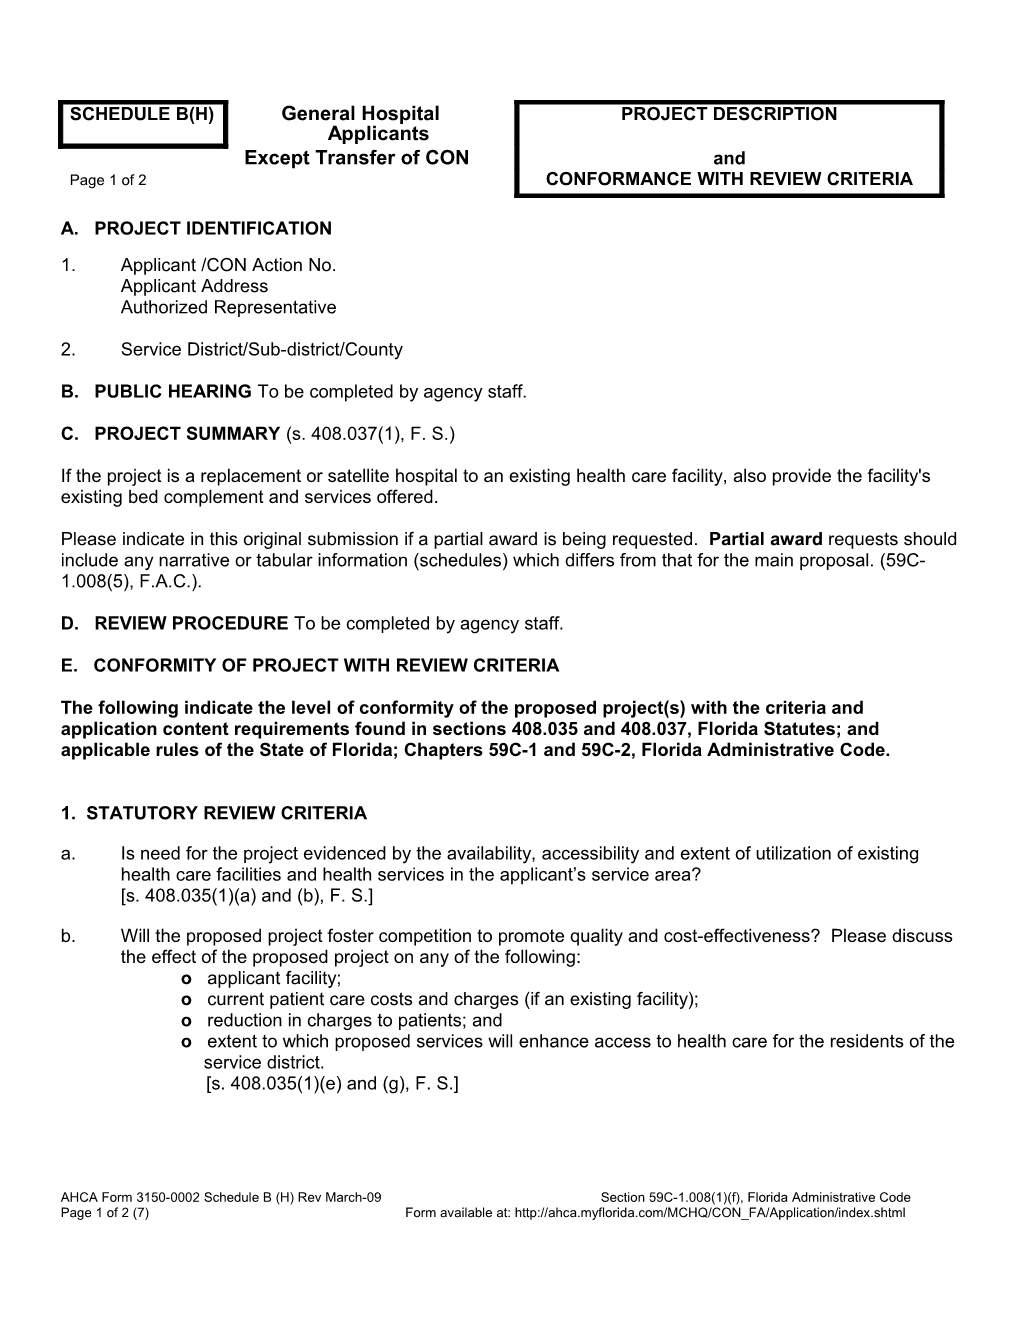 Application for Certificate of Need s1